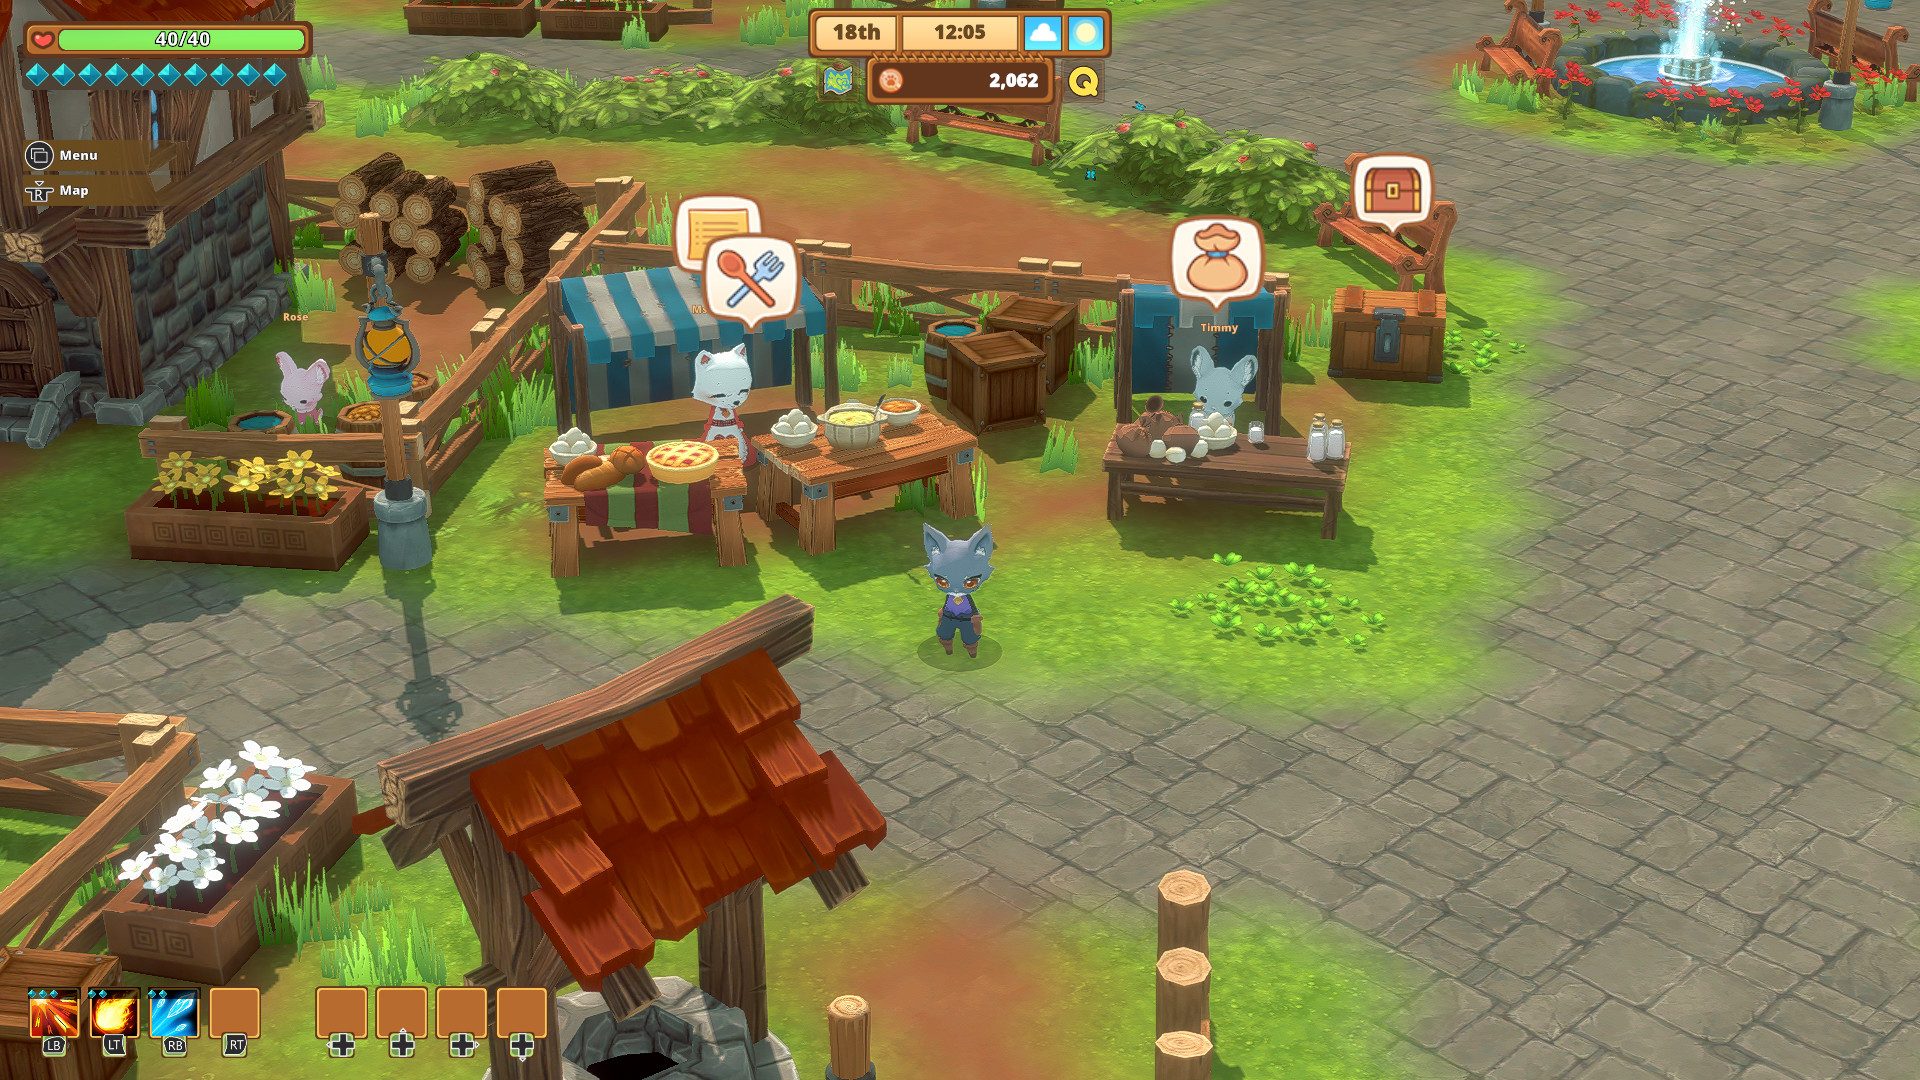 Kitaria Fables is Stardew Valley with playable cats and more swords, and it’s out now